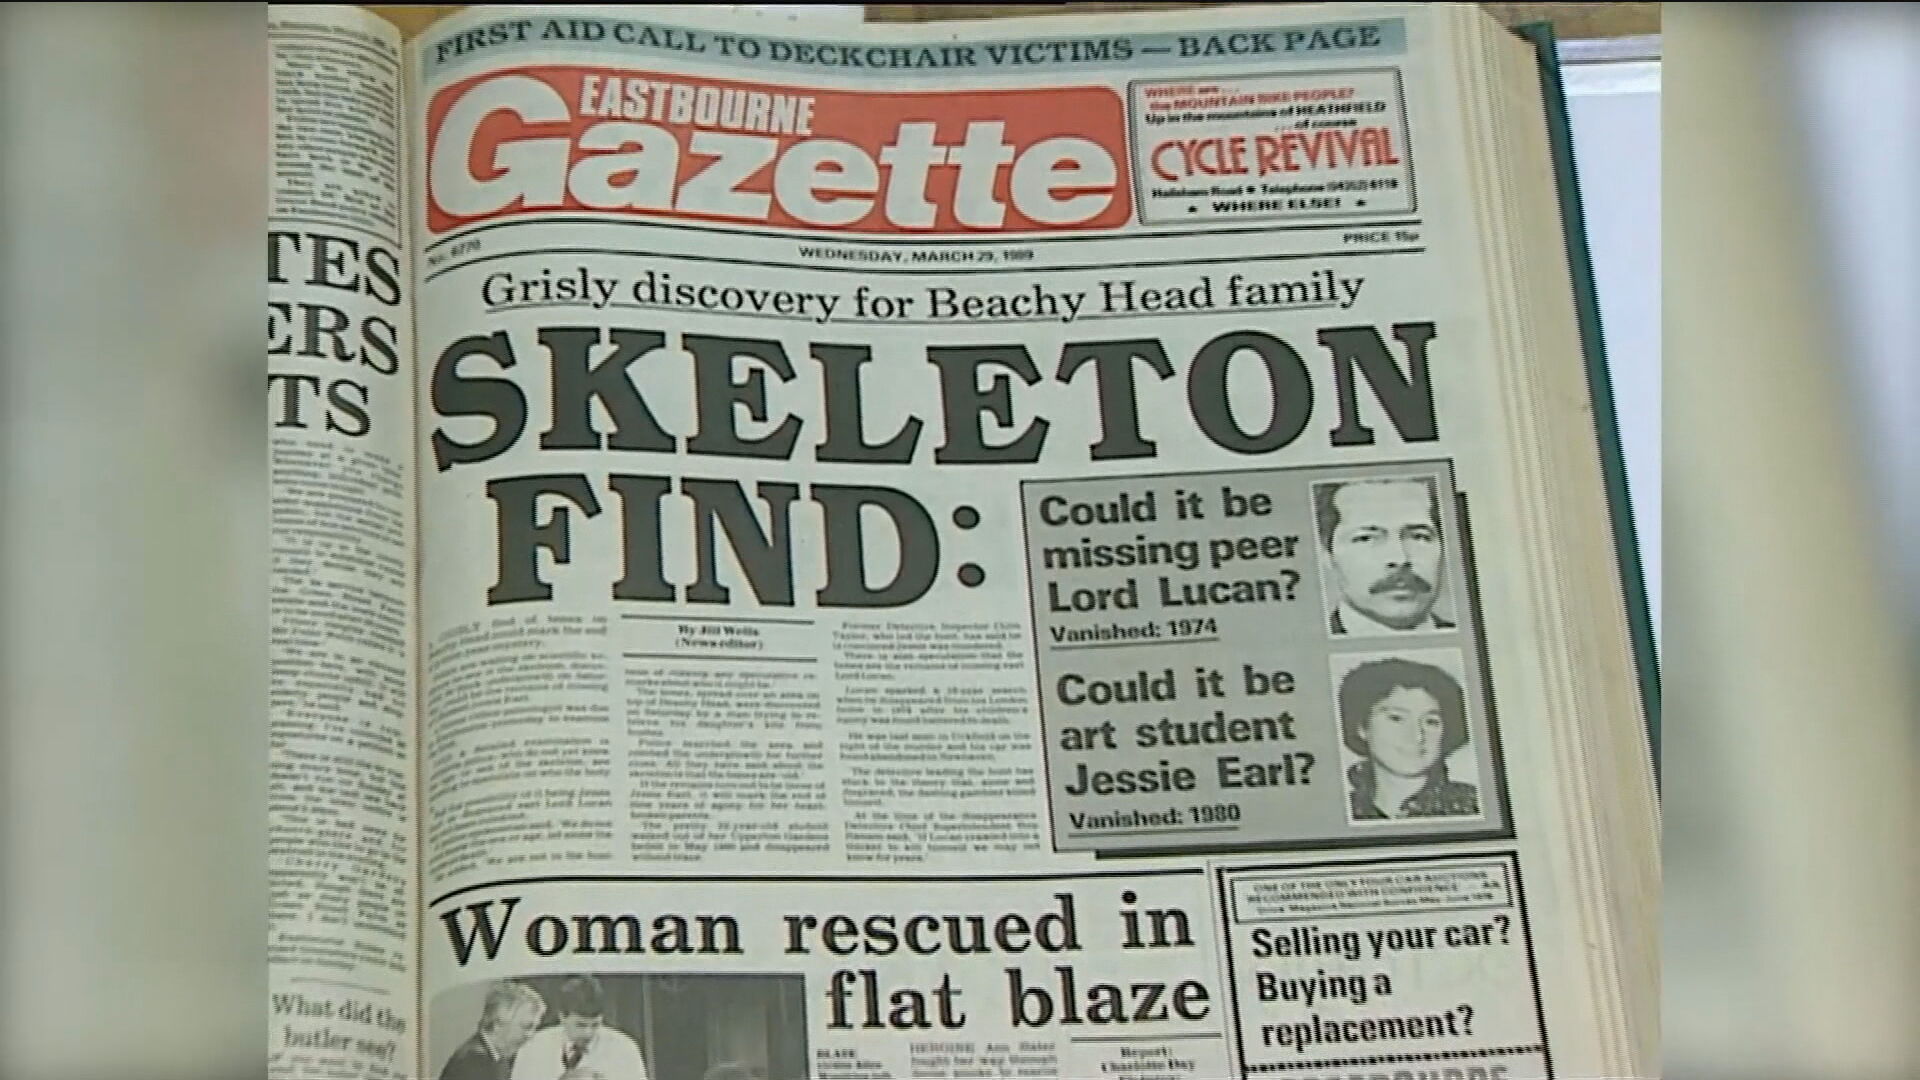 A local newspaper reports the discovery of Jessie Earl's body.